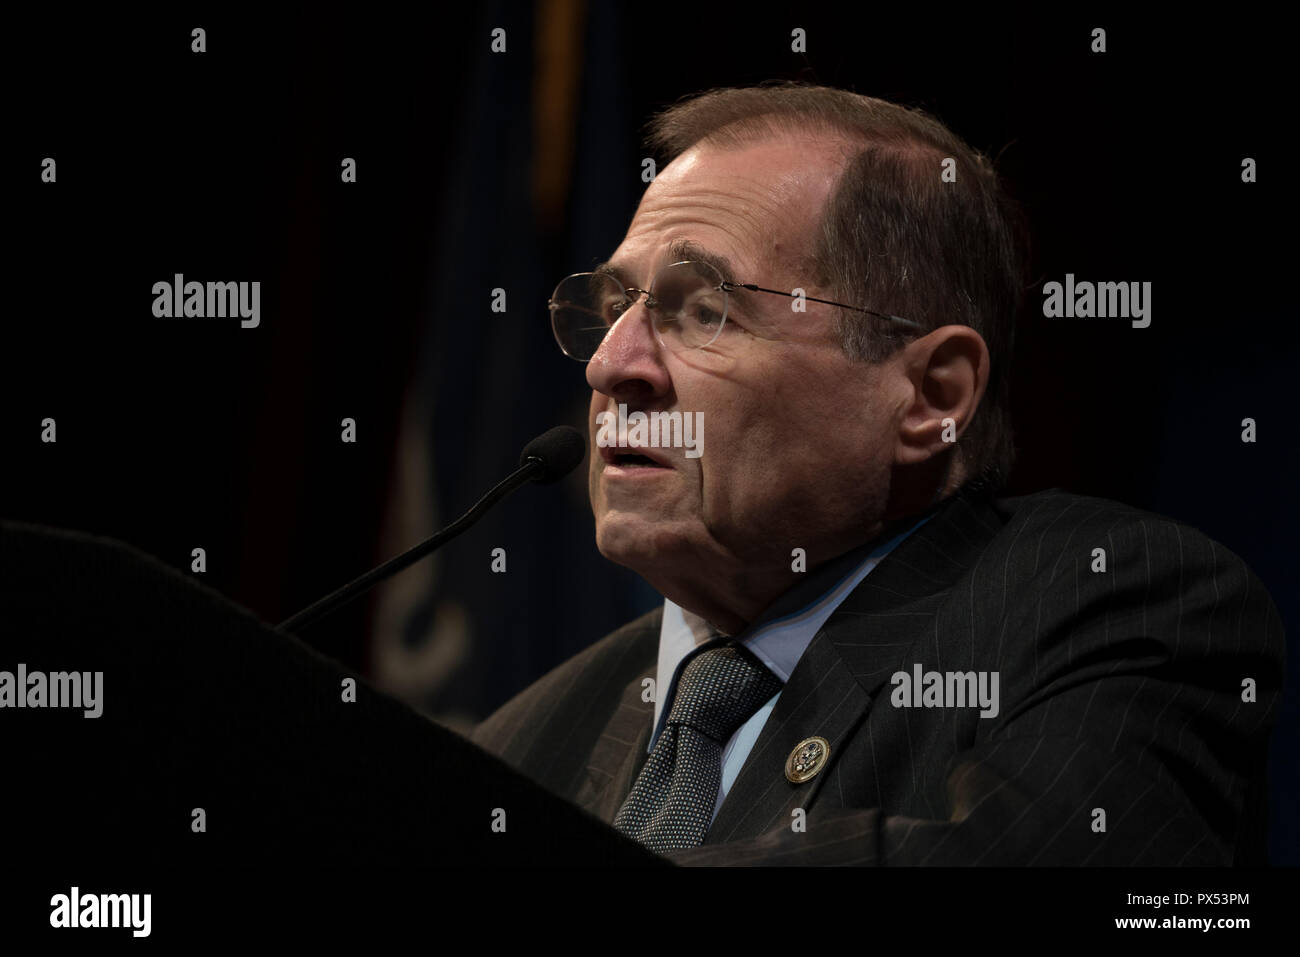 Congressman Jerrold Nadler (D-NY), who represents the 10th Congressional District, spoke at a Town Hall meeting on Oct. 9, 2018. Stock Photo